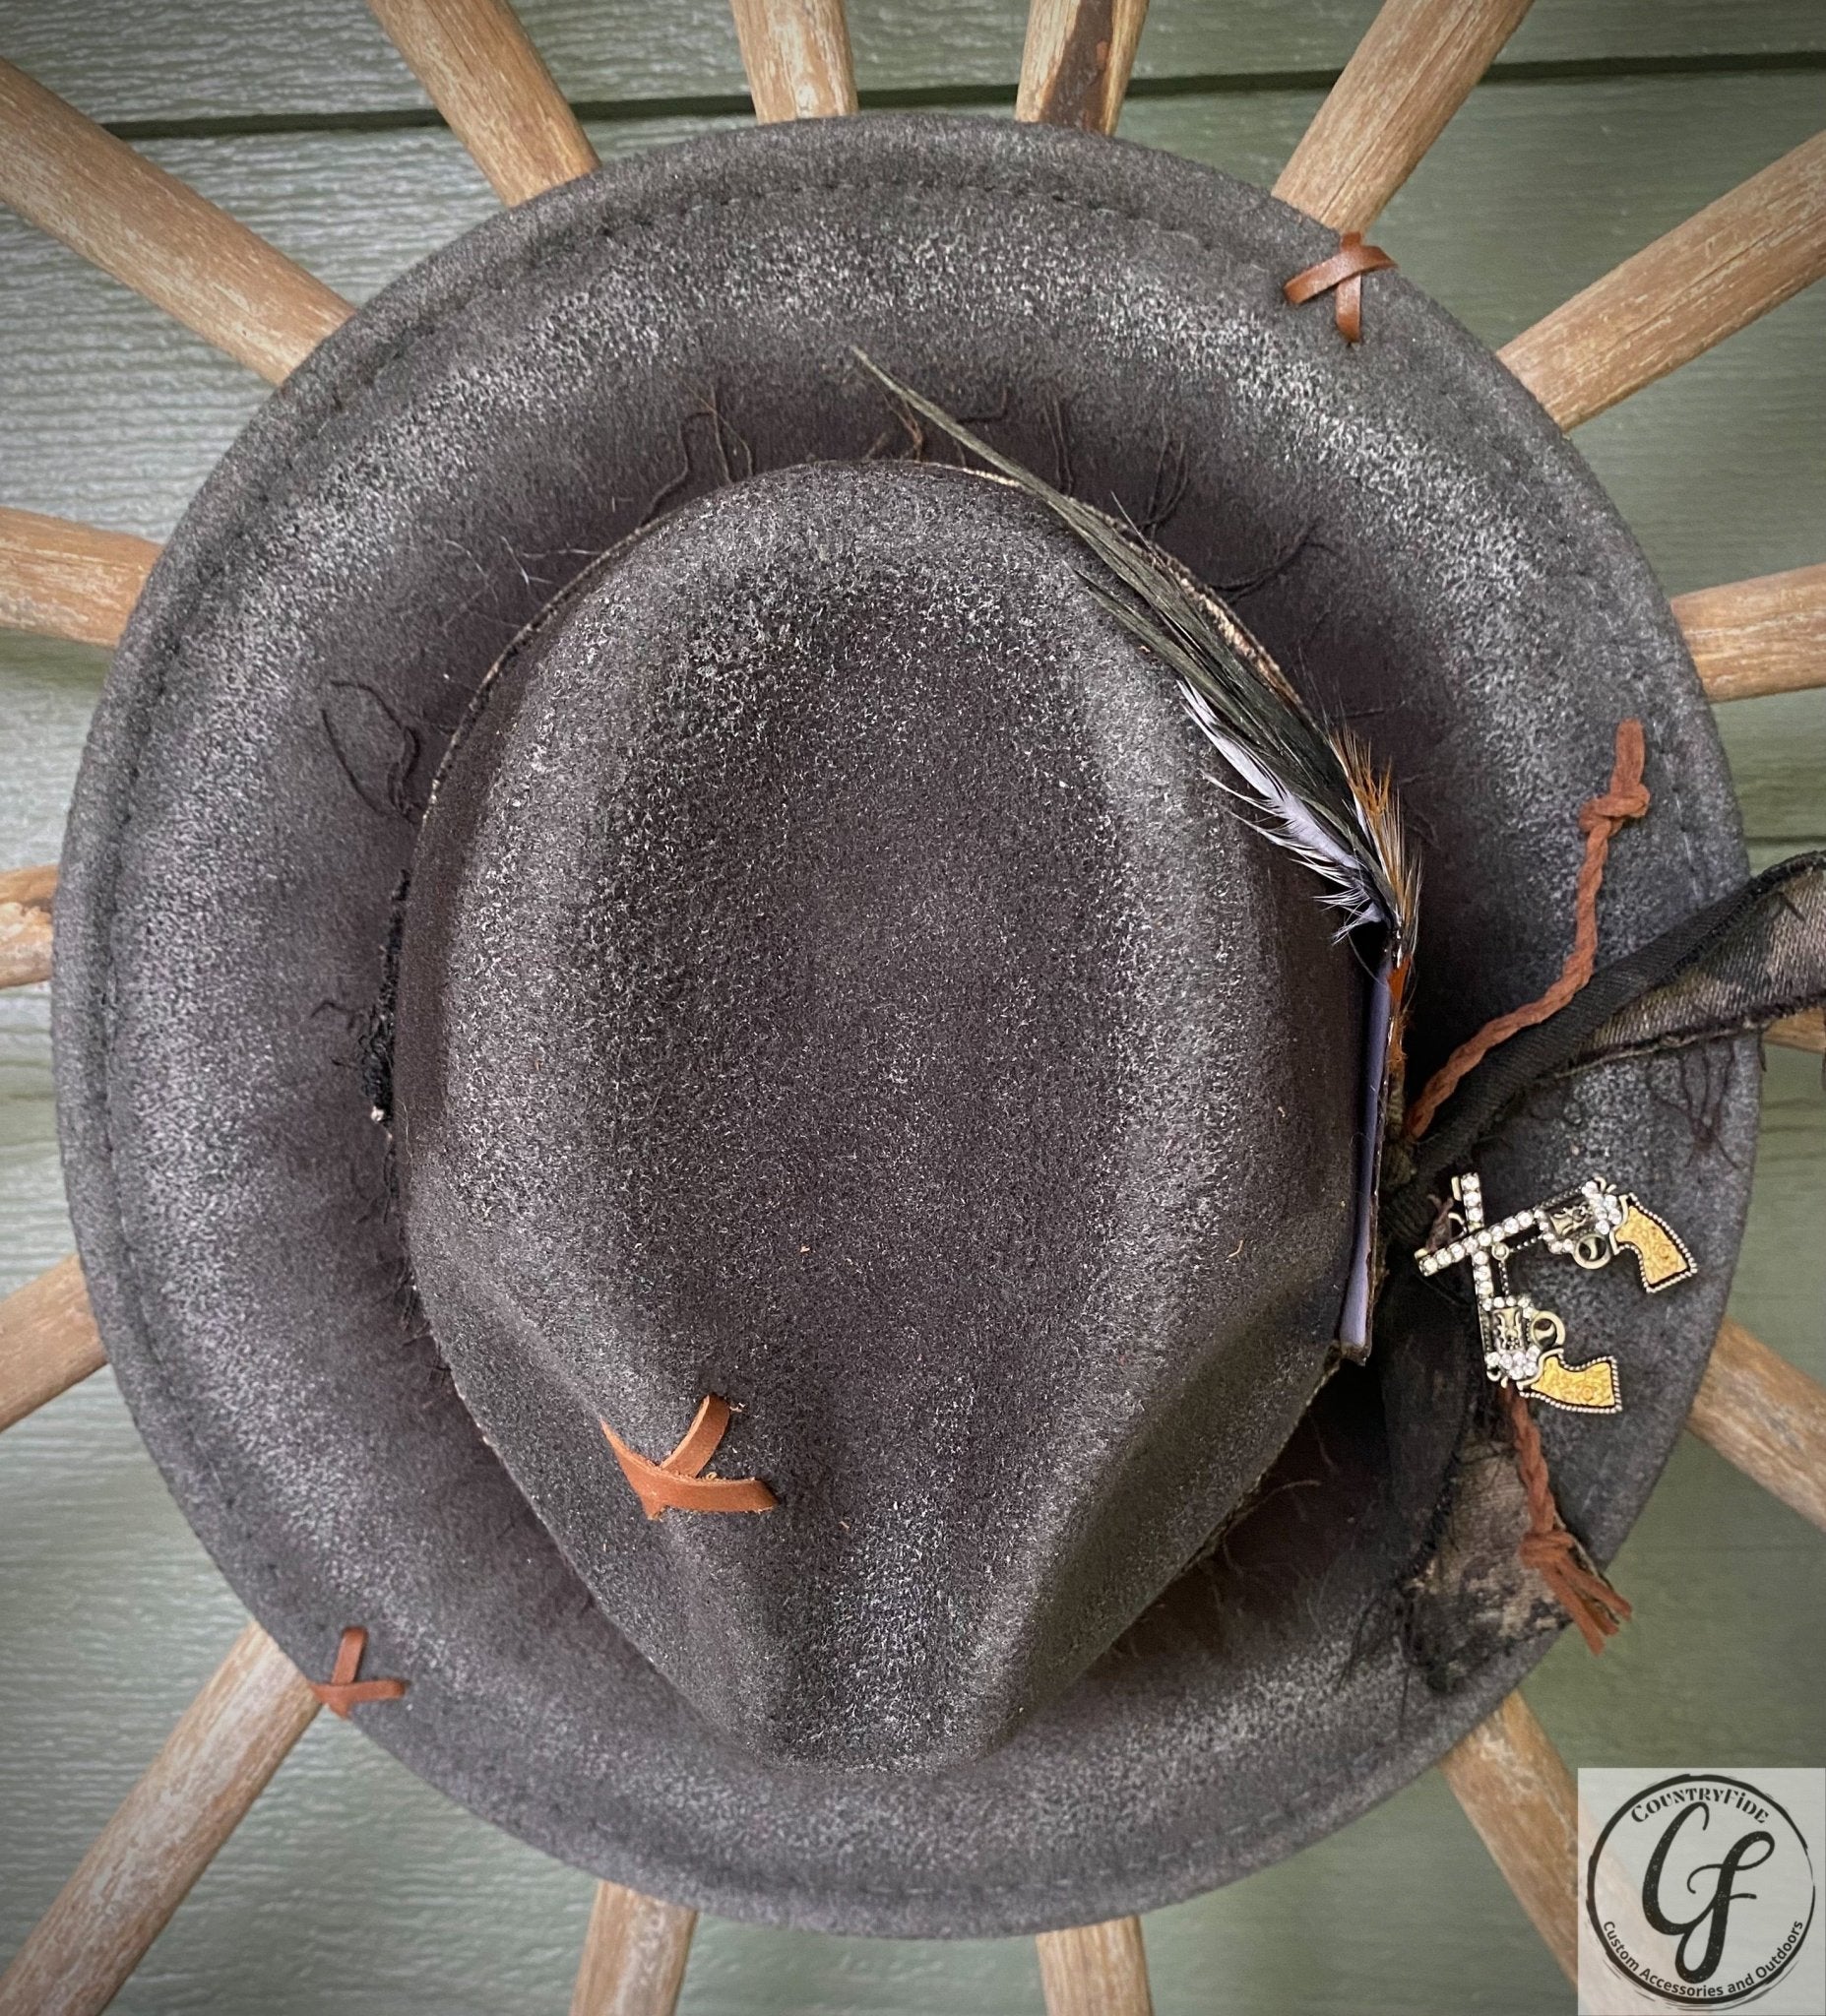 WILD WEST FEDORA - CountryFide Custom Accessories and Outdoors